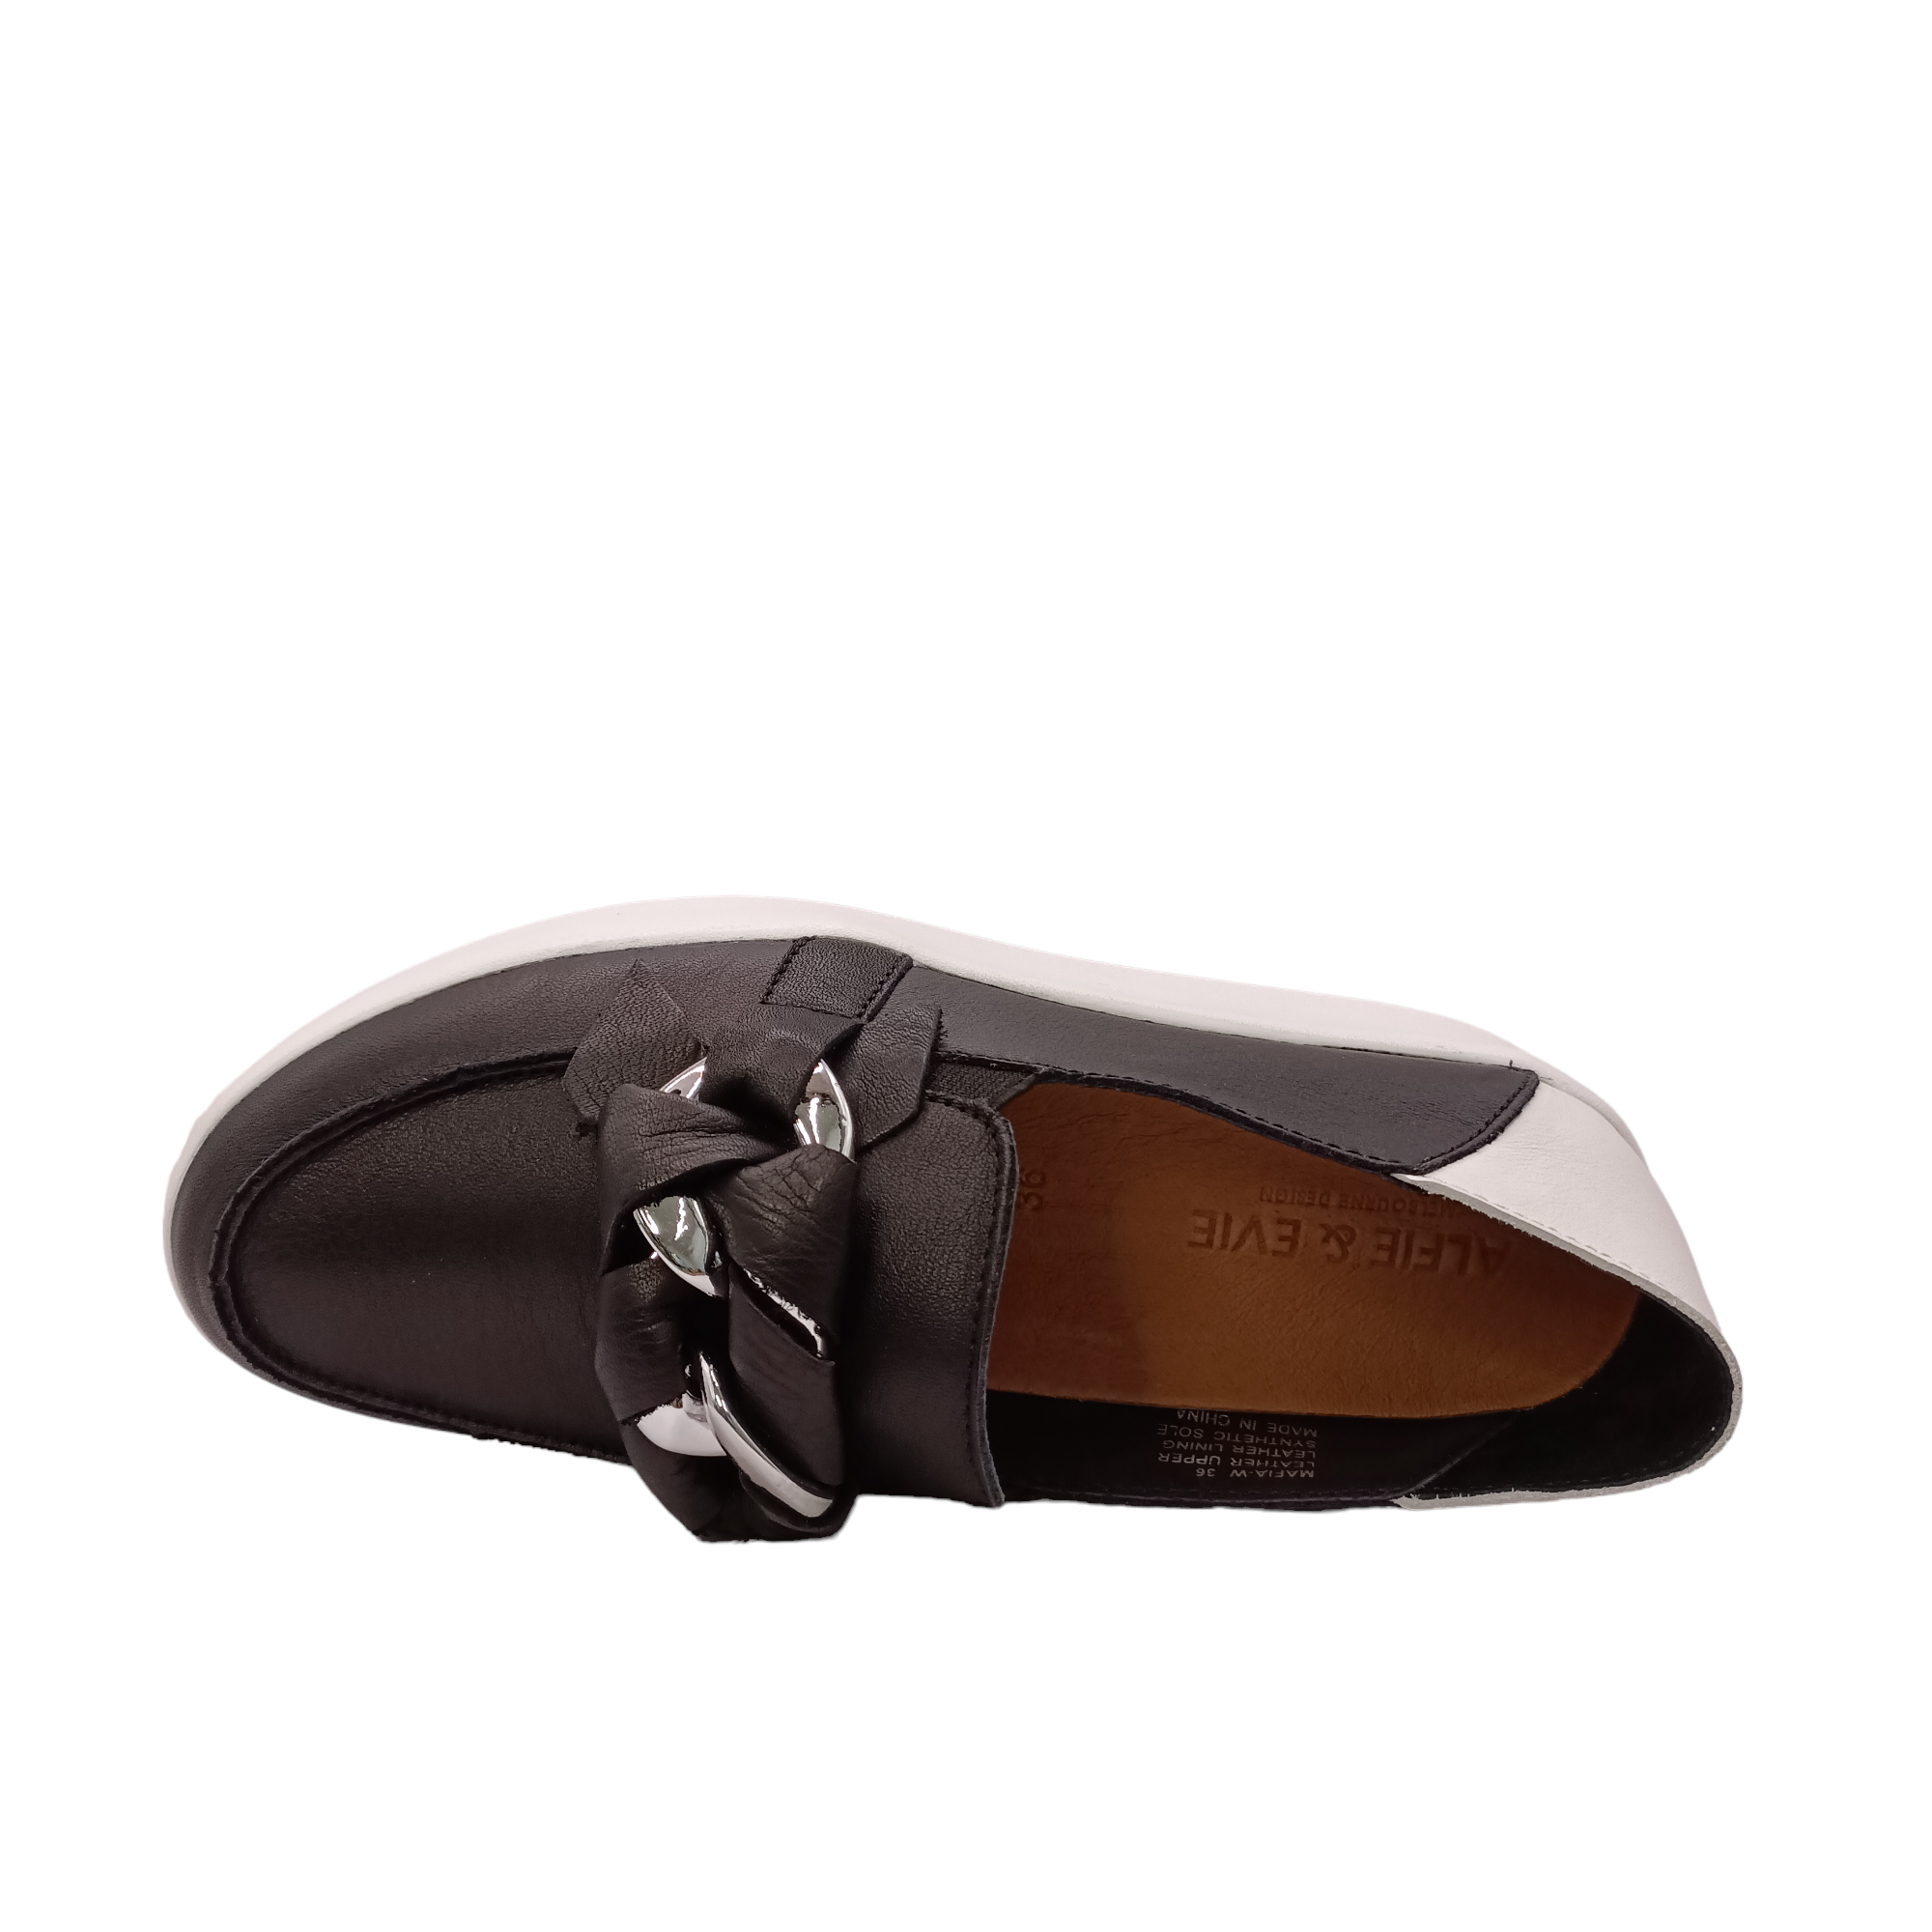 Top view of black slip on shoe called mafia from Alfie & Evie. Black leather laced in silver chain decorating the top, white leather heel with a white sole. Shop Alfie & Evie Womens Shoes online and In-Store with shoe&me Mount Maunganui.